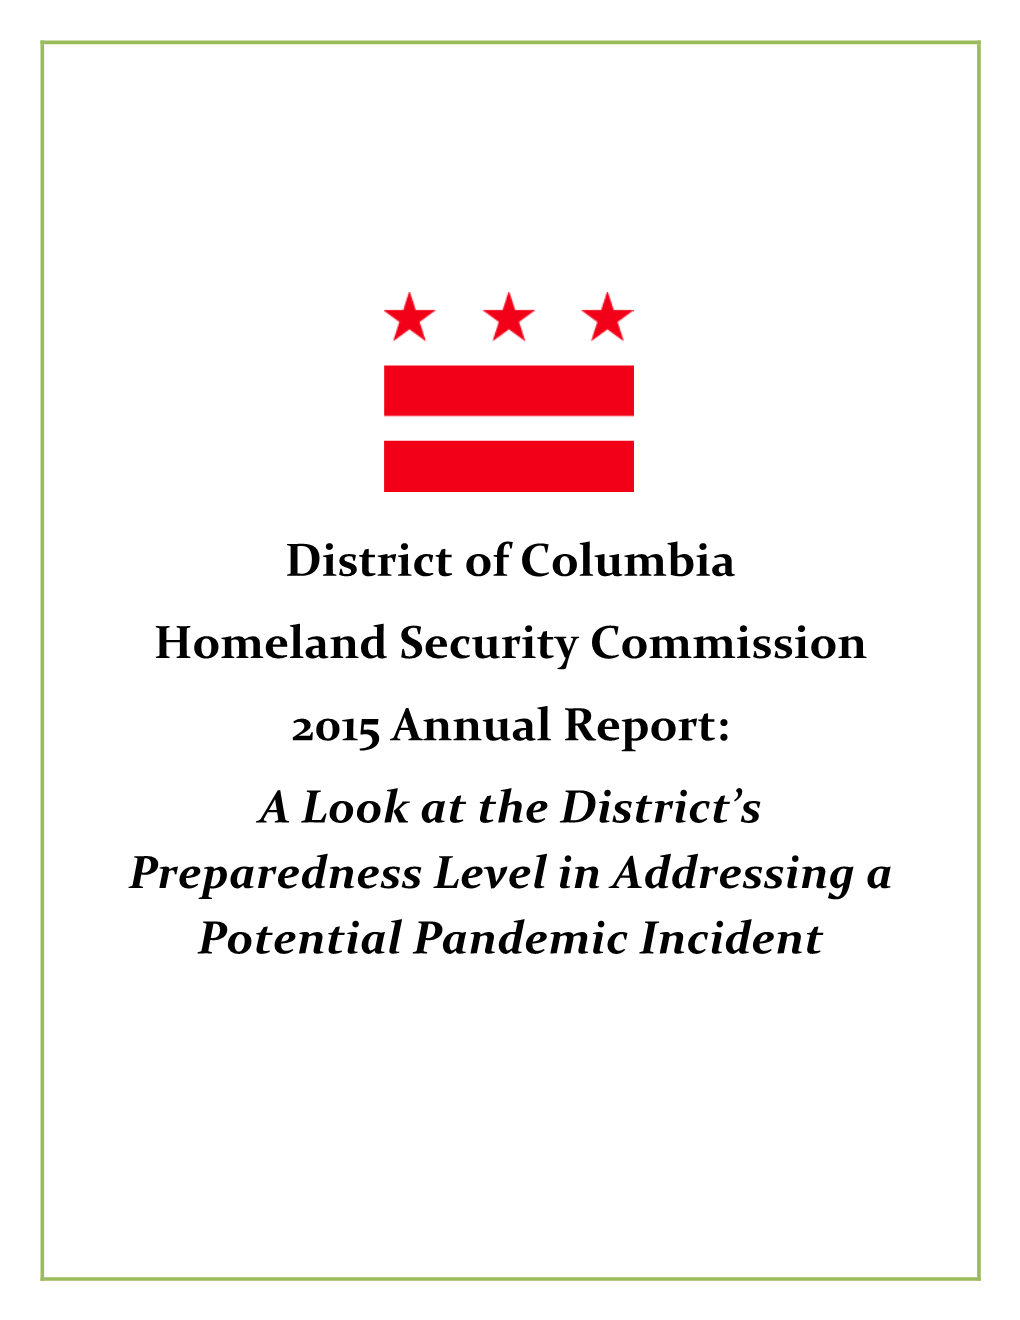 Homeland Security Commission